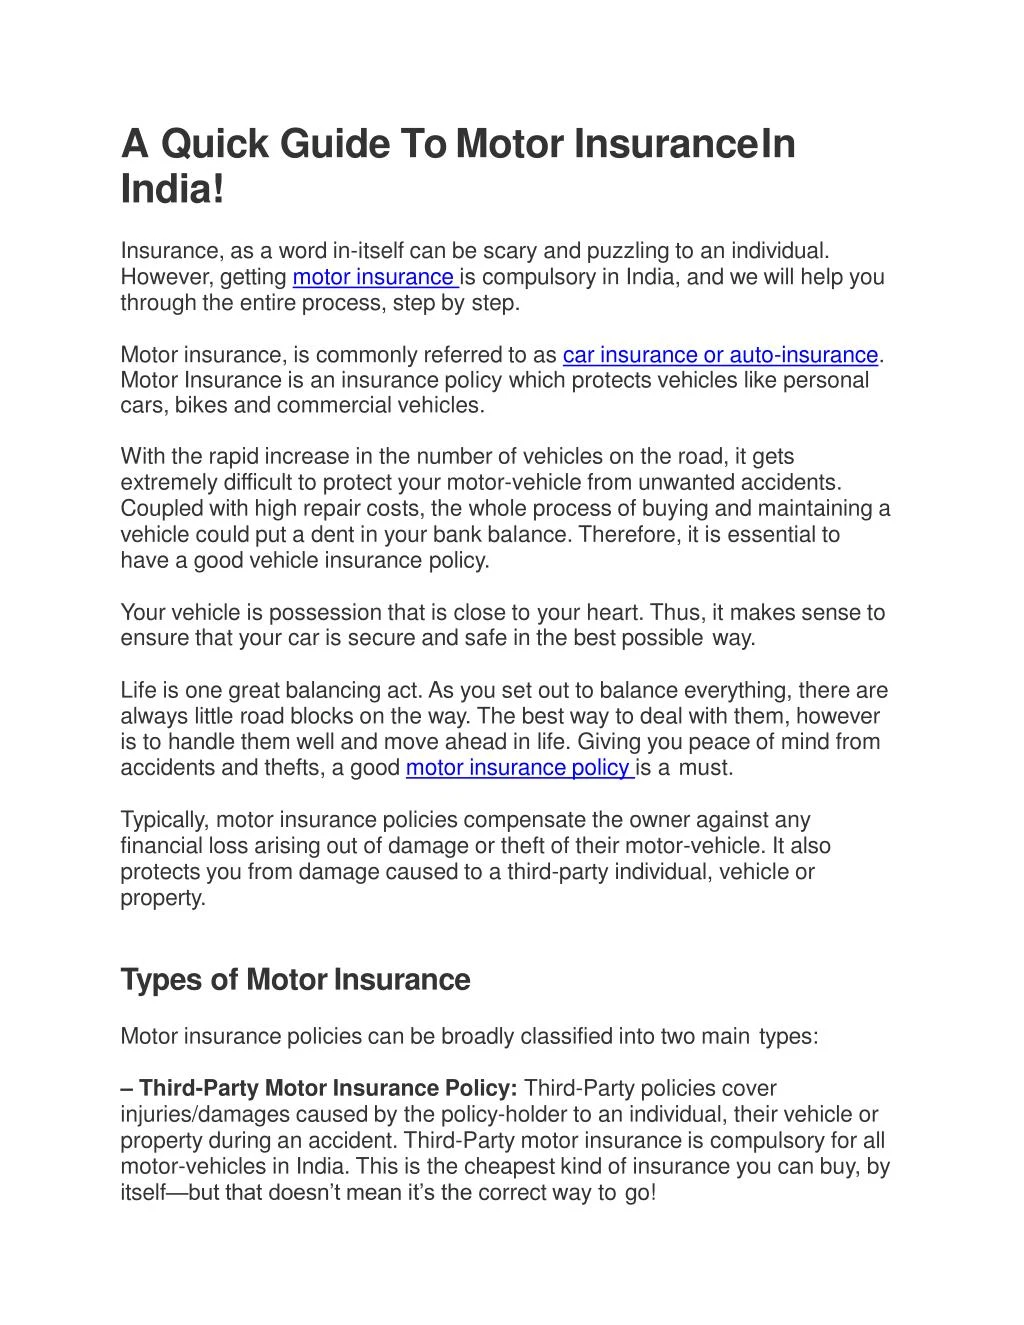 literature review on motor insurance in india